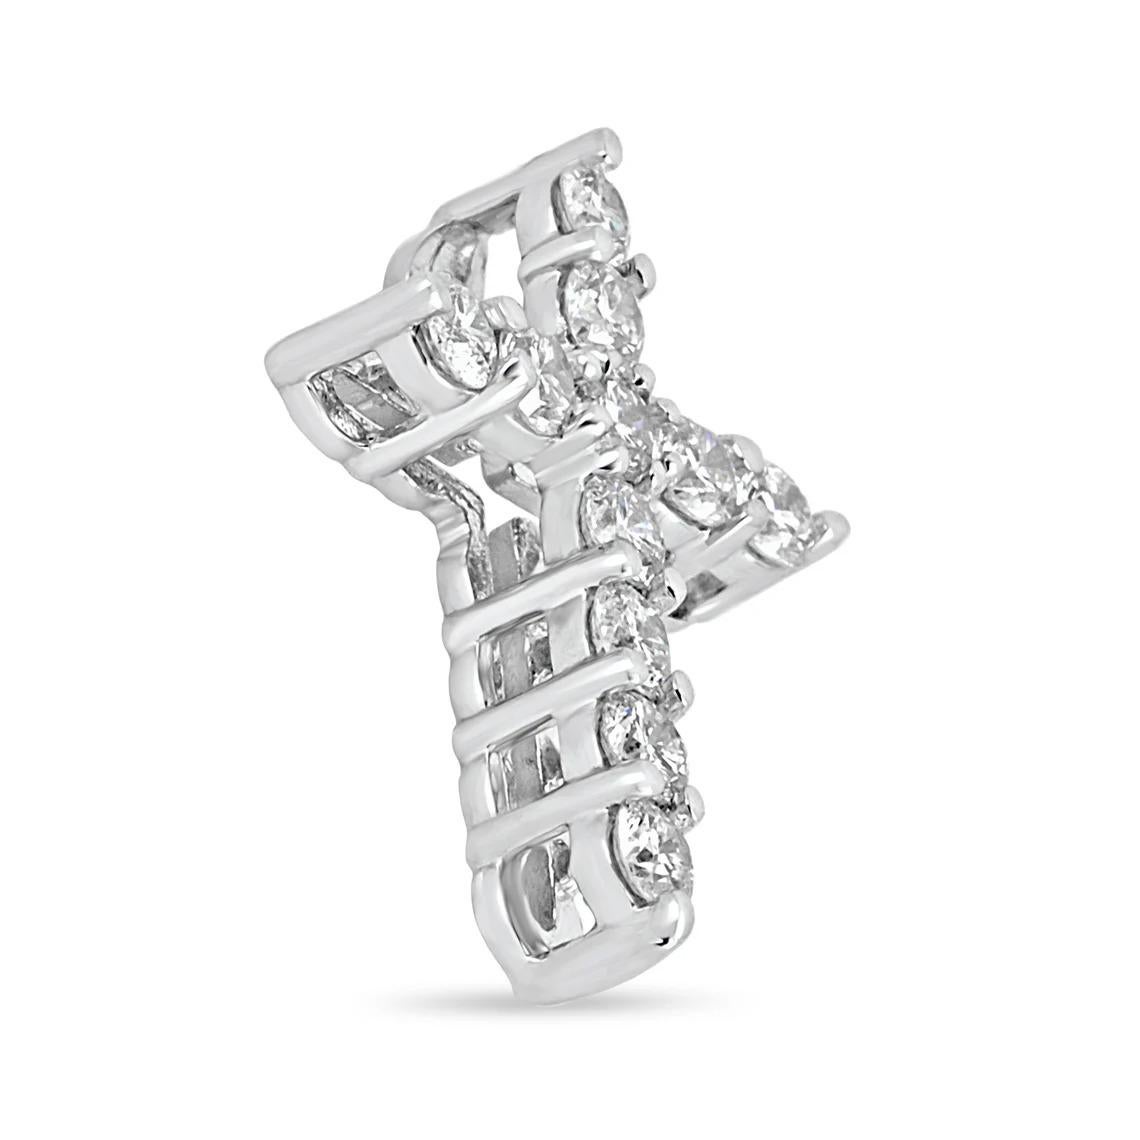 A token of faith. A 14k white gold cross showcases 11 stunning, brilliant round diamonds, prong set. Each diamond is near colorless with very good eye clarity. This pendant is a perfect size, not too small but big enough to be noticed and adored.